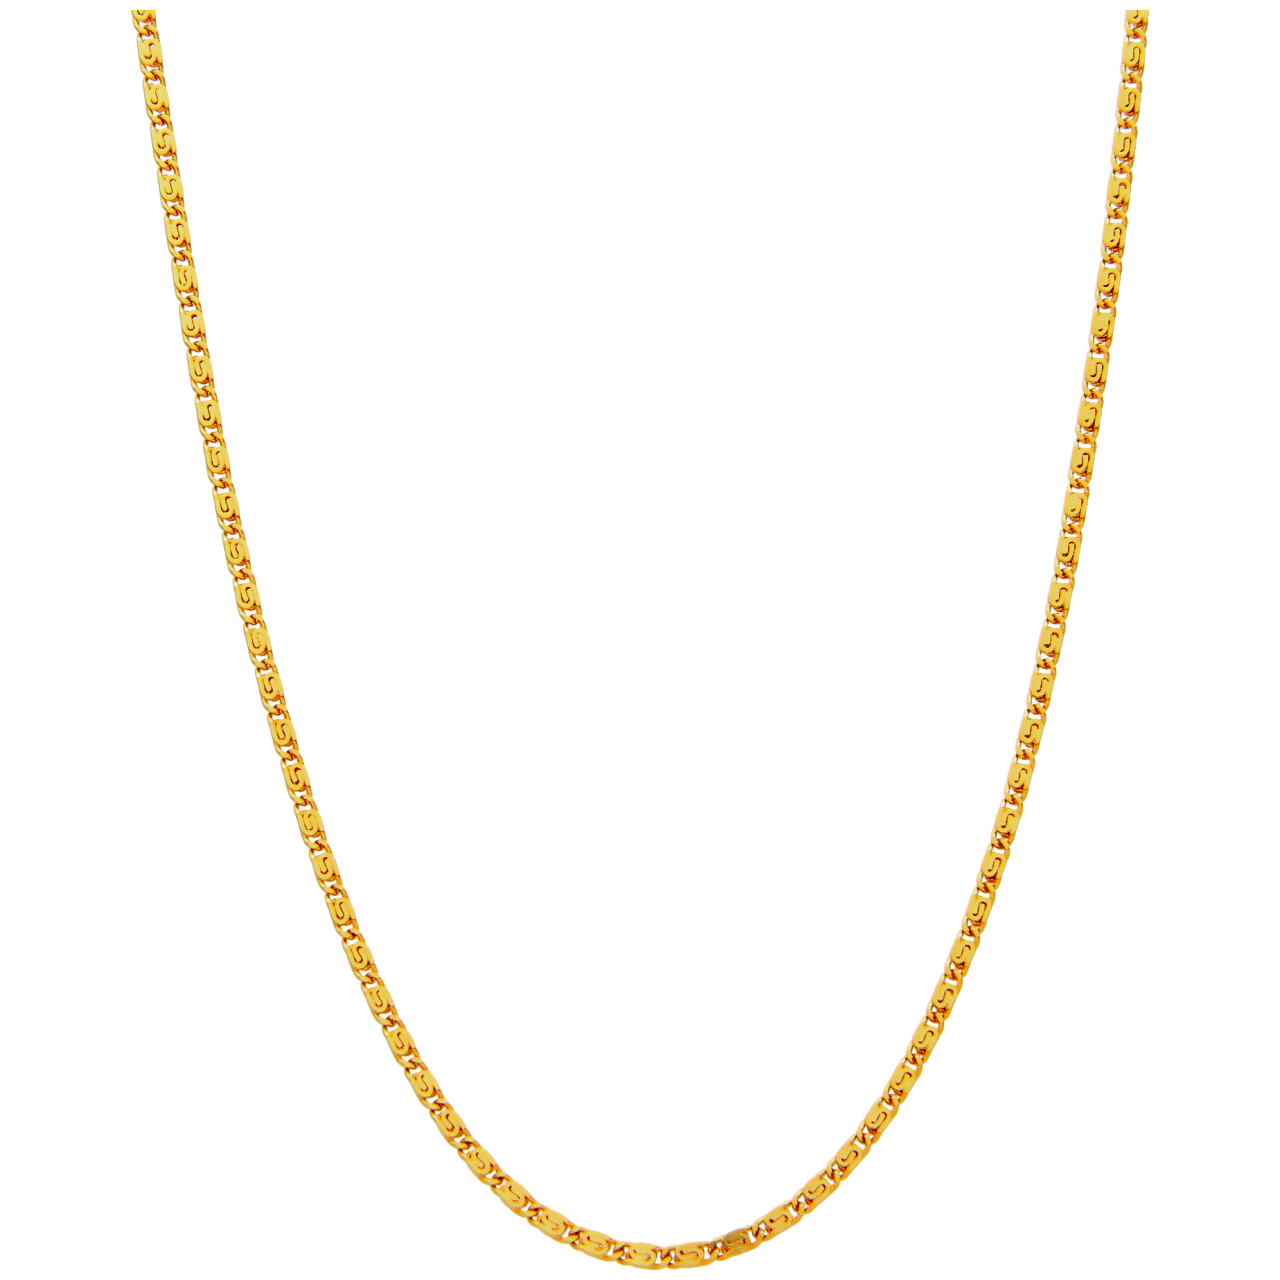 Yellow gold necklace 45 cm.